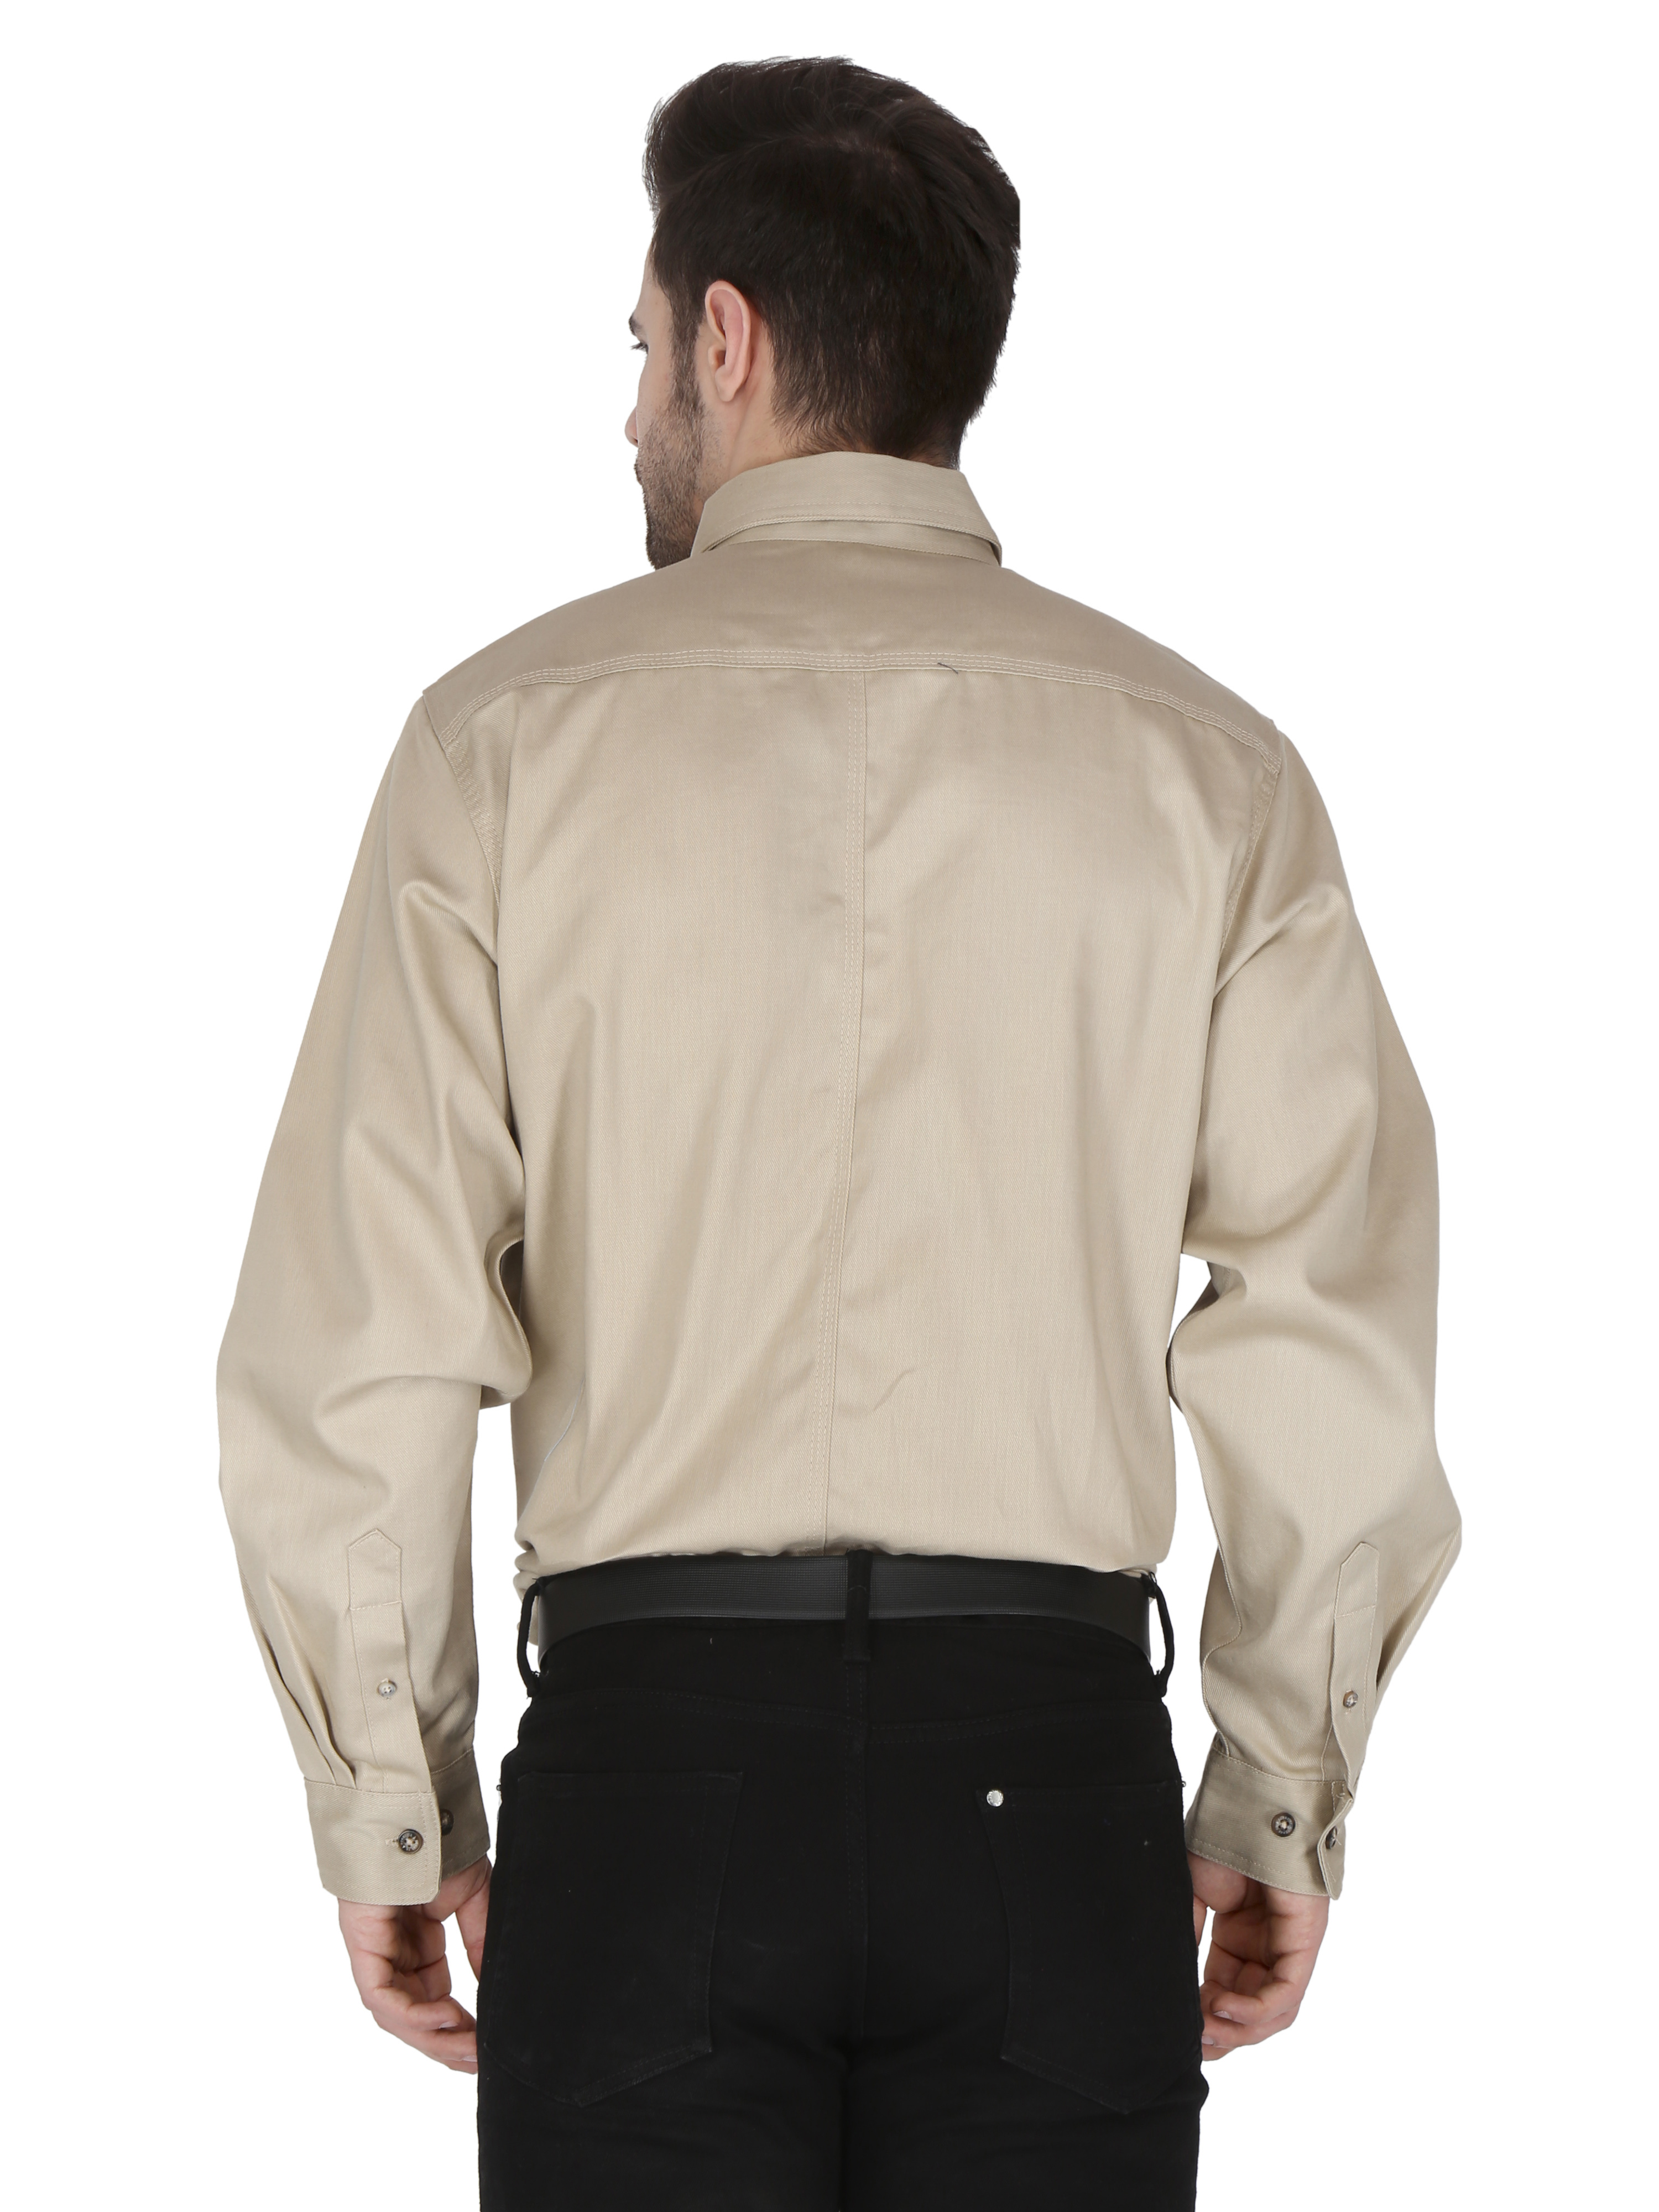 Picture of Forge FR MFRLB2PS-024 MEN'S FR SOLID BUTTON SHIRT